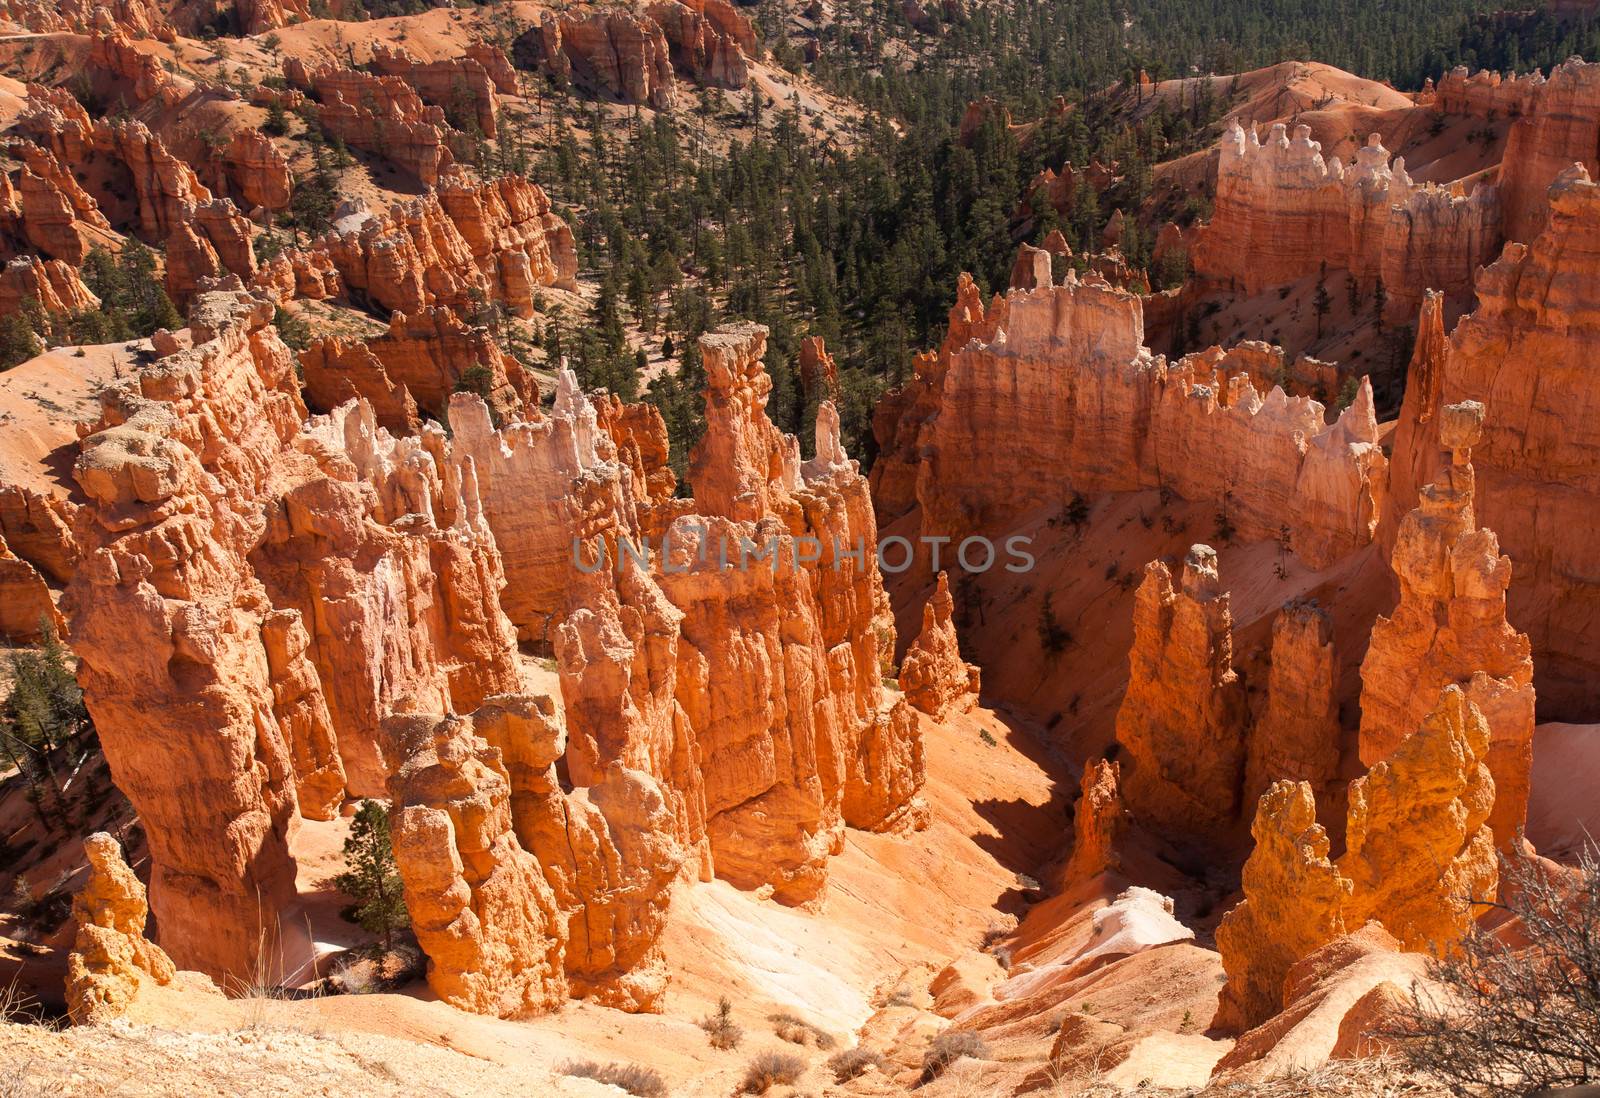 This was taken at Bryce Canyon National Park, Utah. Bryce presents one incredible scene after another.